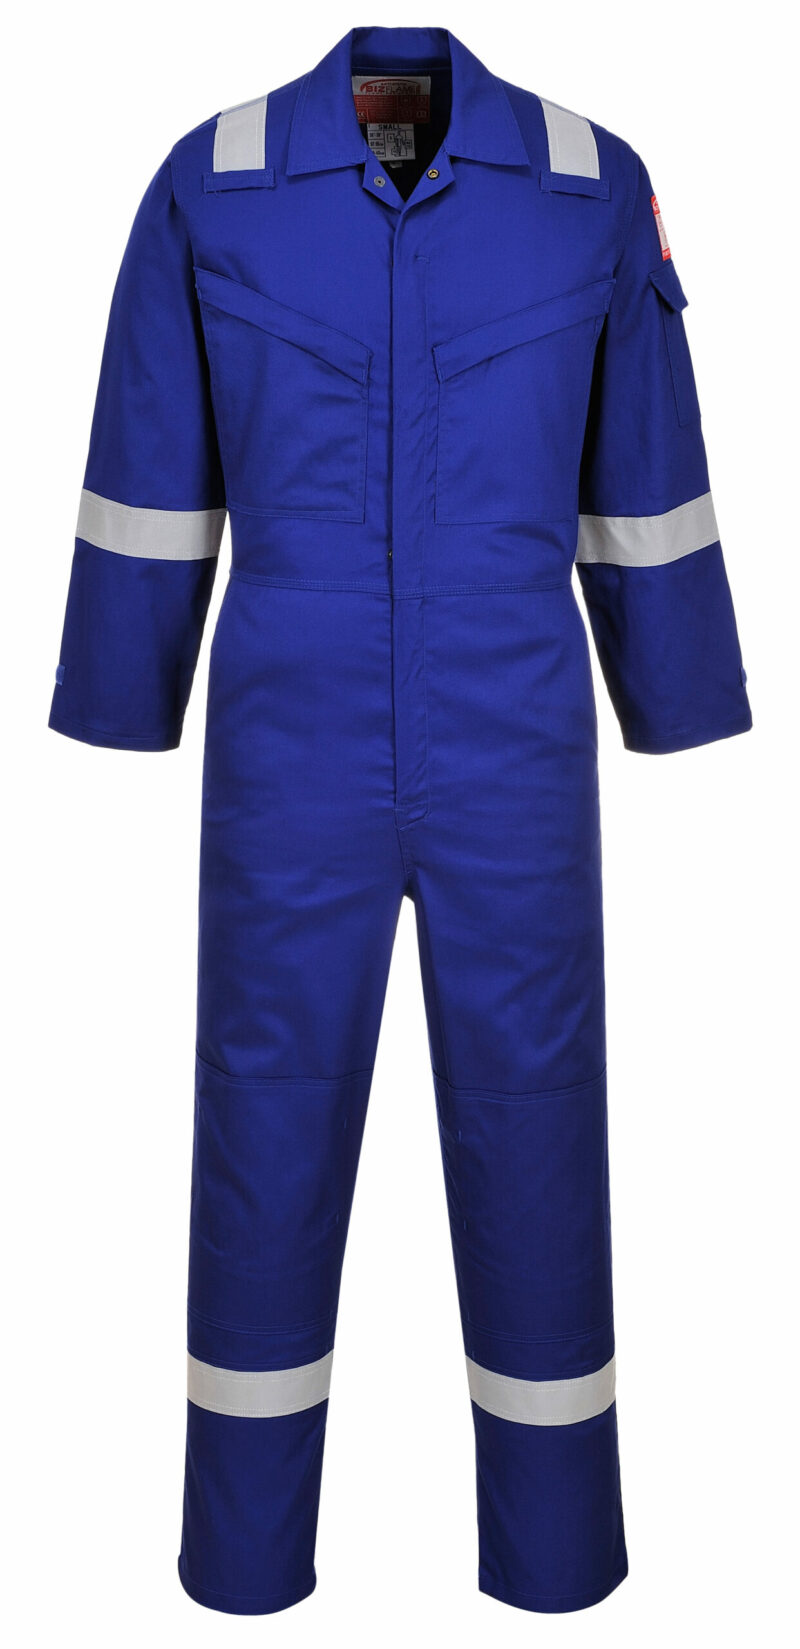 Portwest FR21 Super Light Weight Anti-Static Flame Retardant Coverall-17119